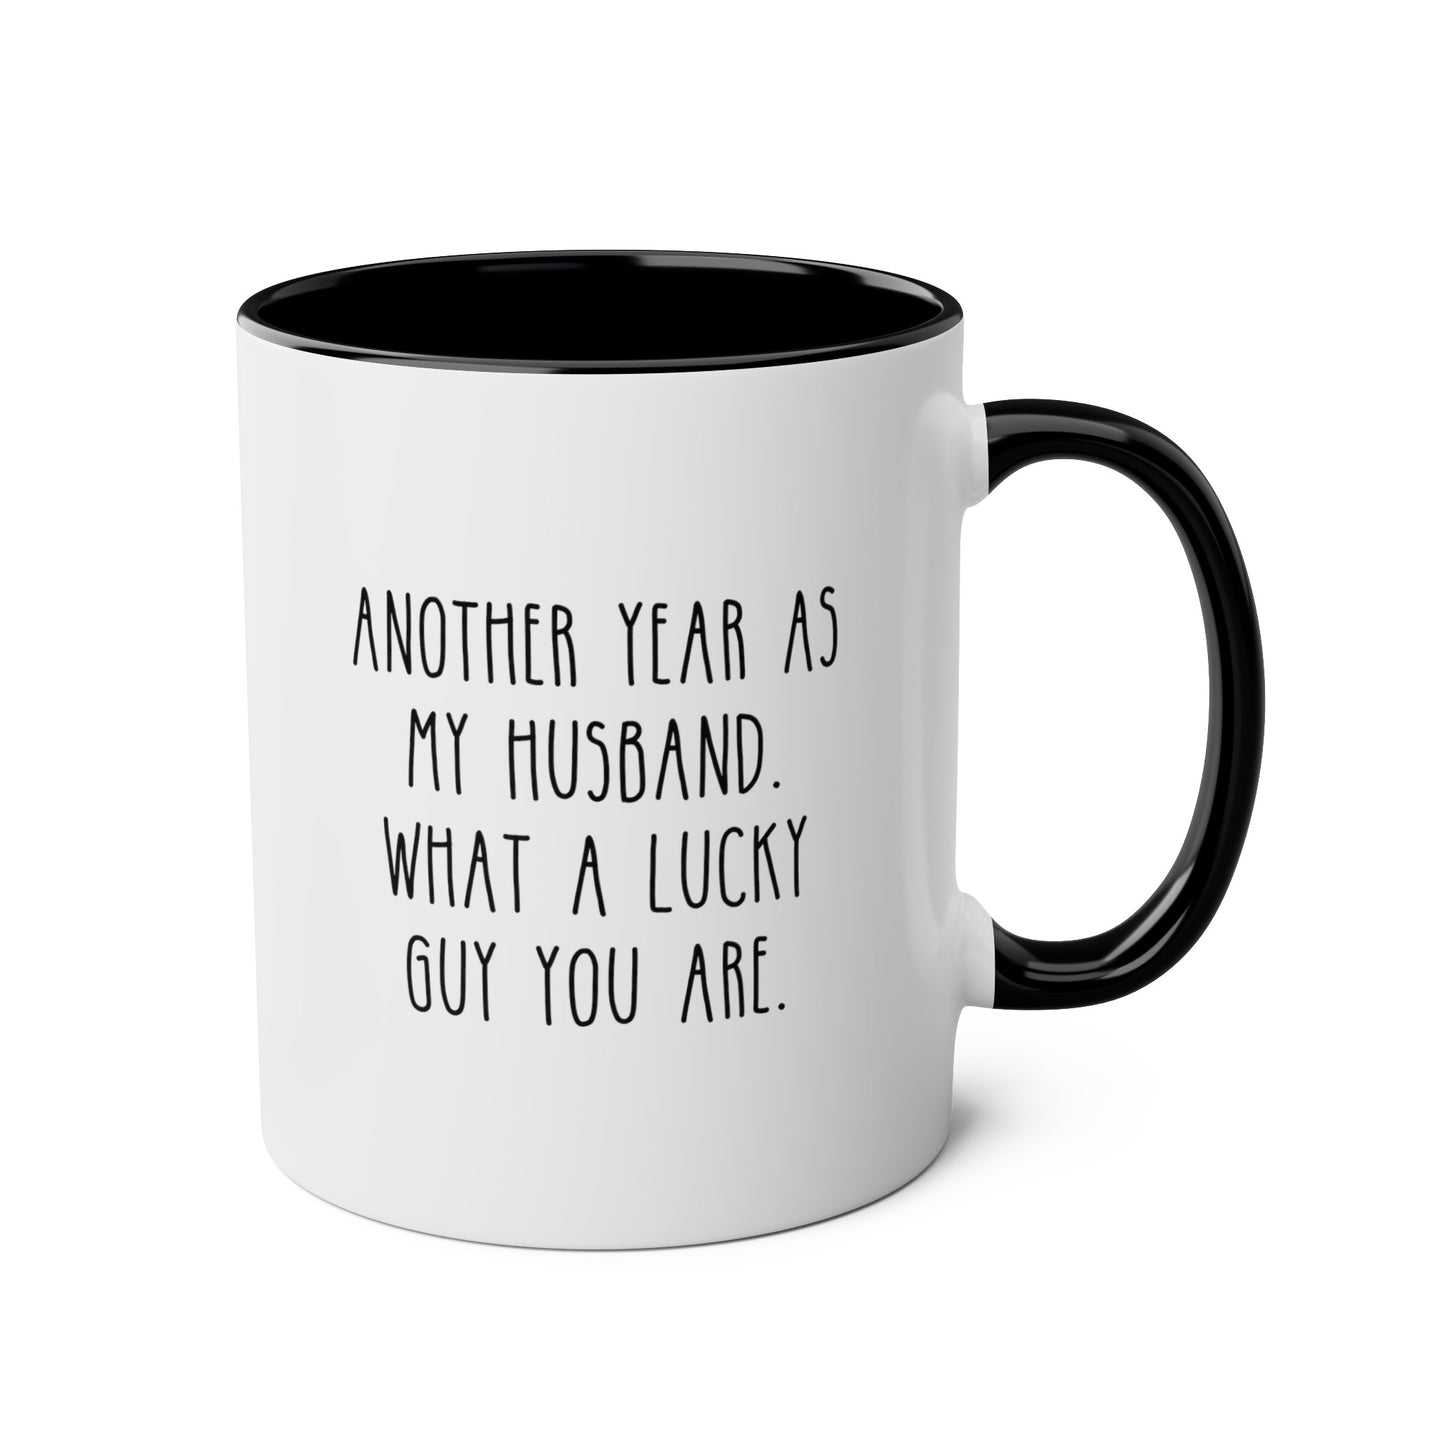 Another Year As My Husband What A Lucky Guy You Are 11oz white with black accent funny large coffee mug gift for Valentines sarcastic hubby fiance wedding anniversary waveywares wavey wares wavywares wavy wares